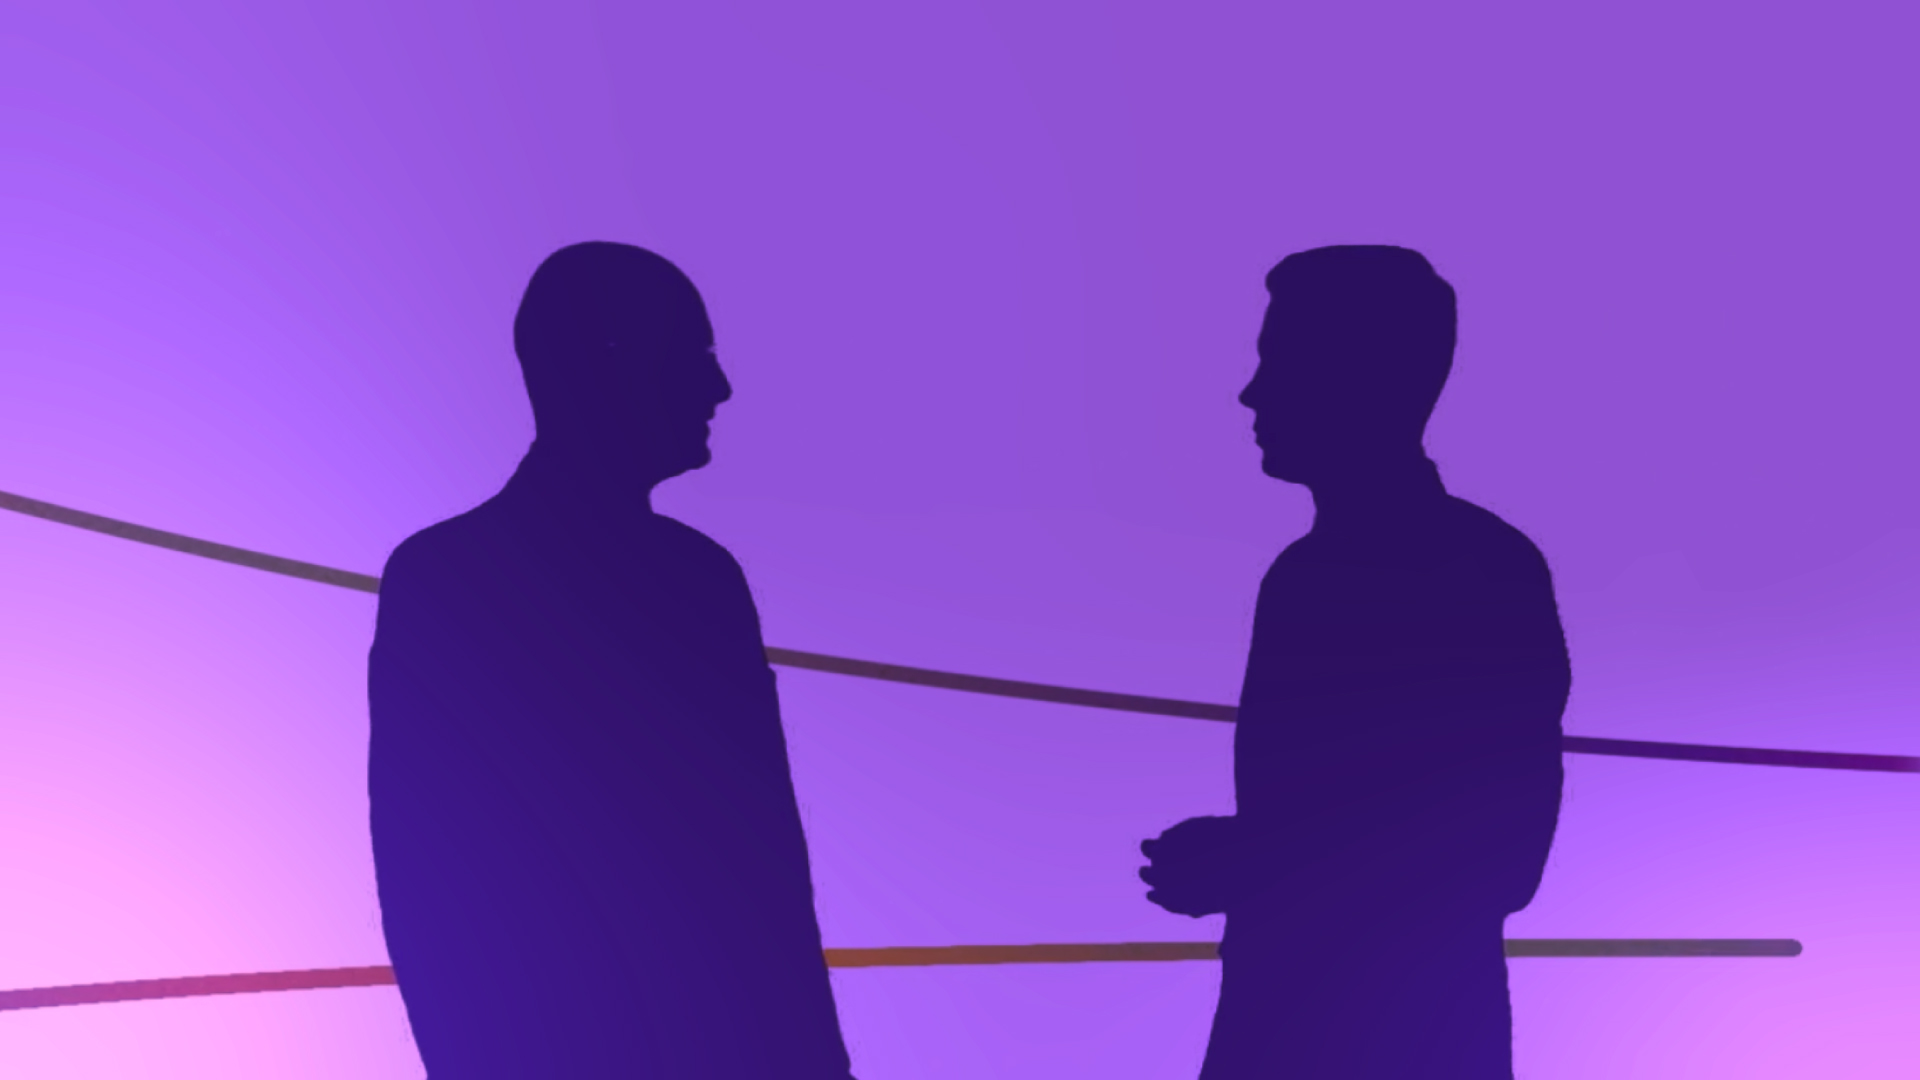 Illustration of two people in silhouette facing each other